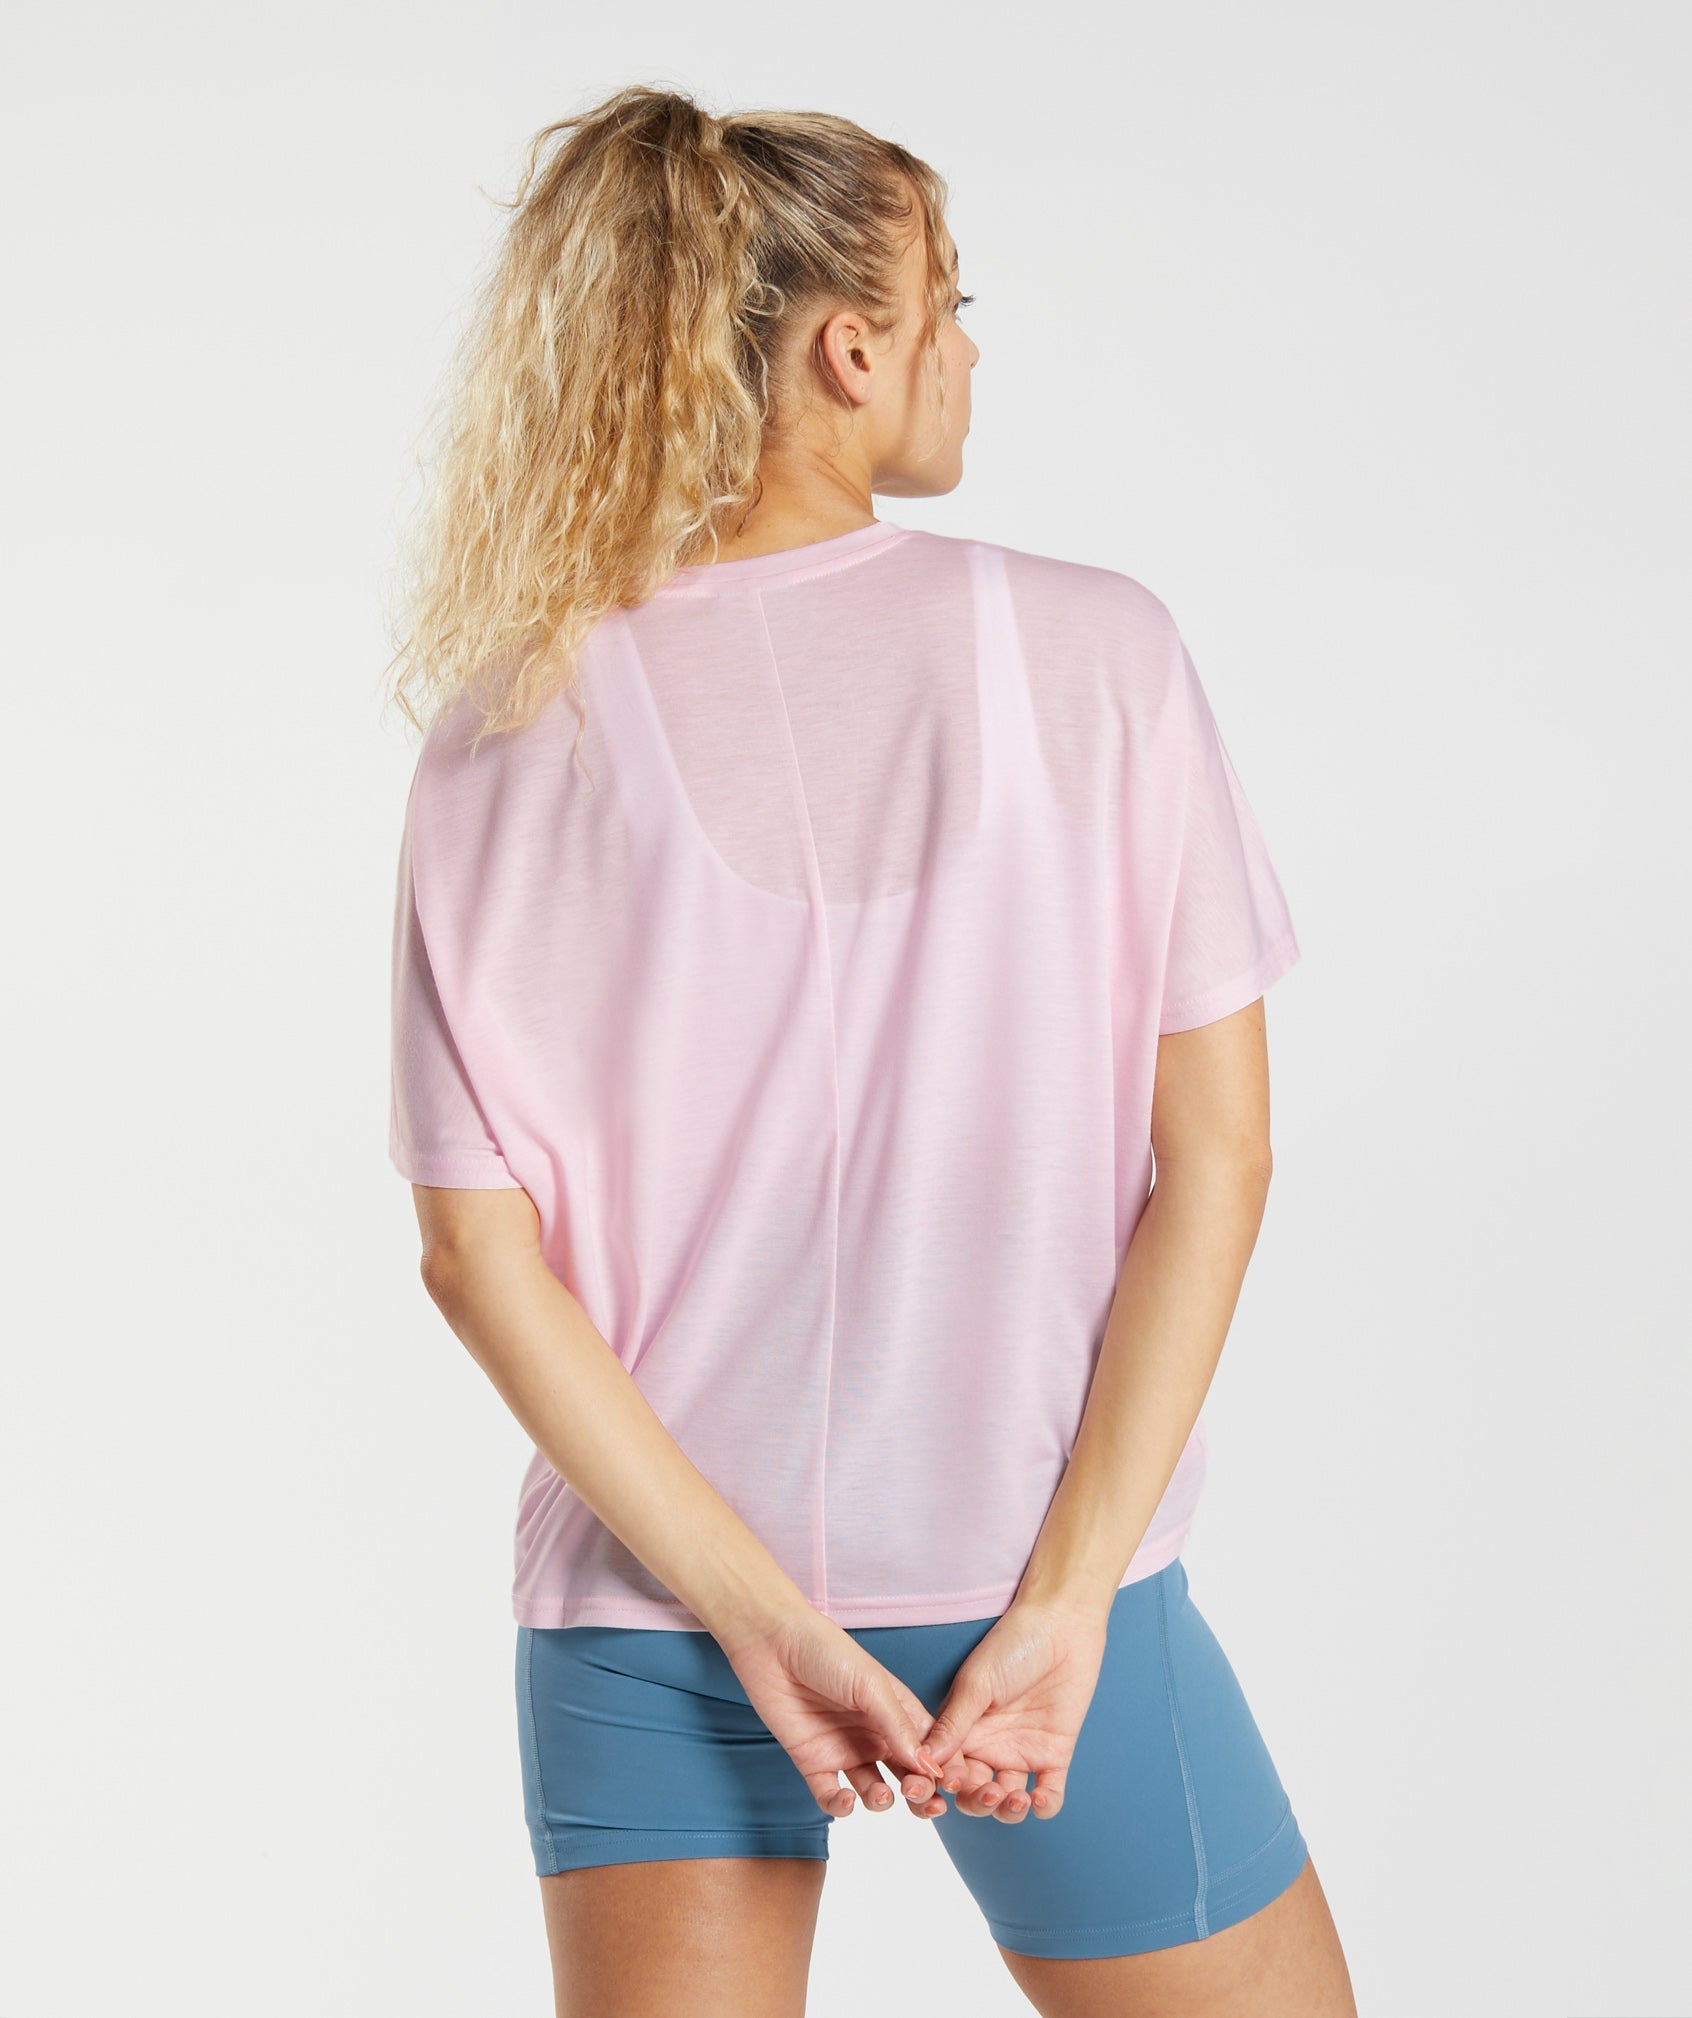 Super Soft T-Shirt in Chalk Pink - view 2